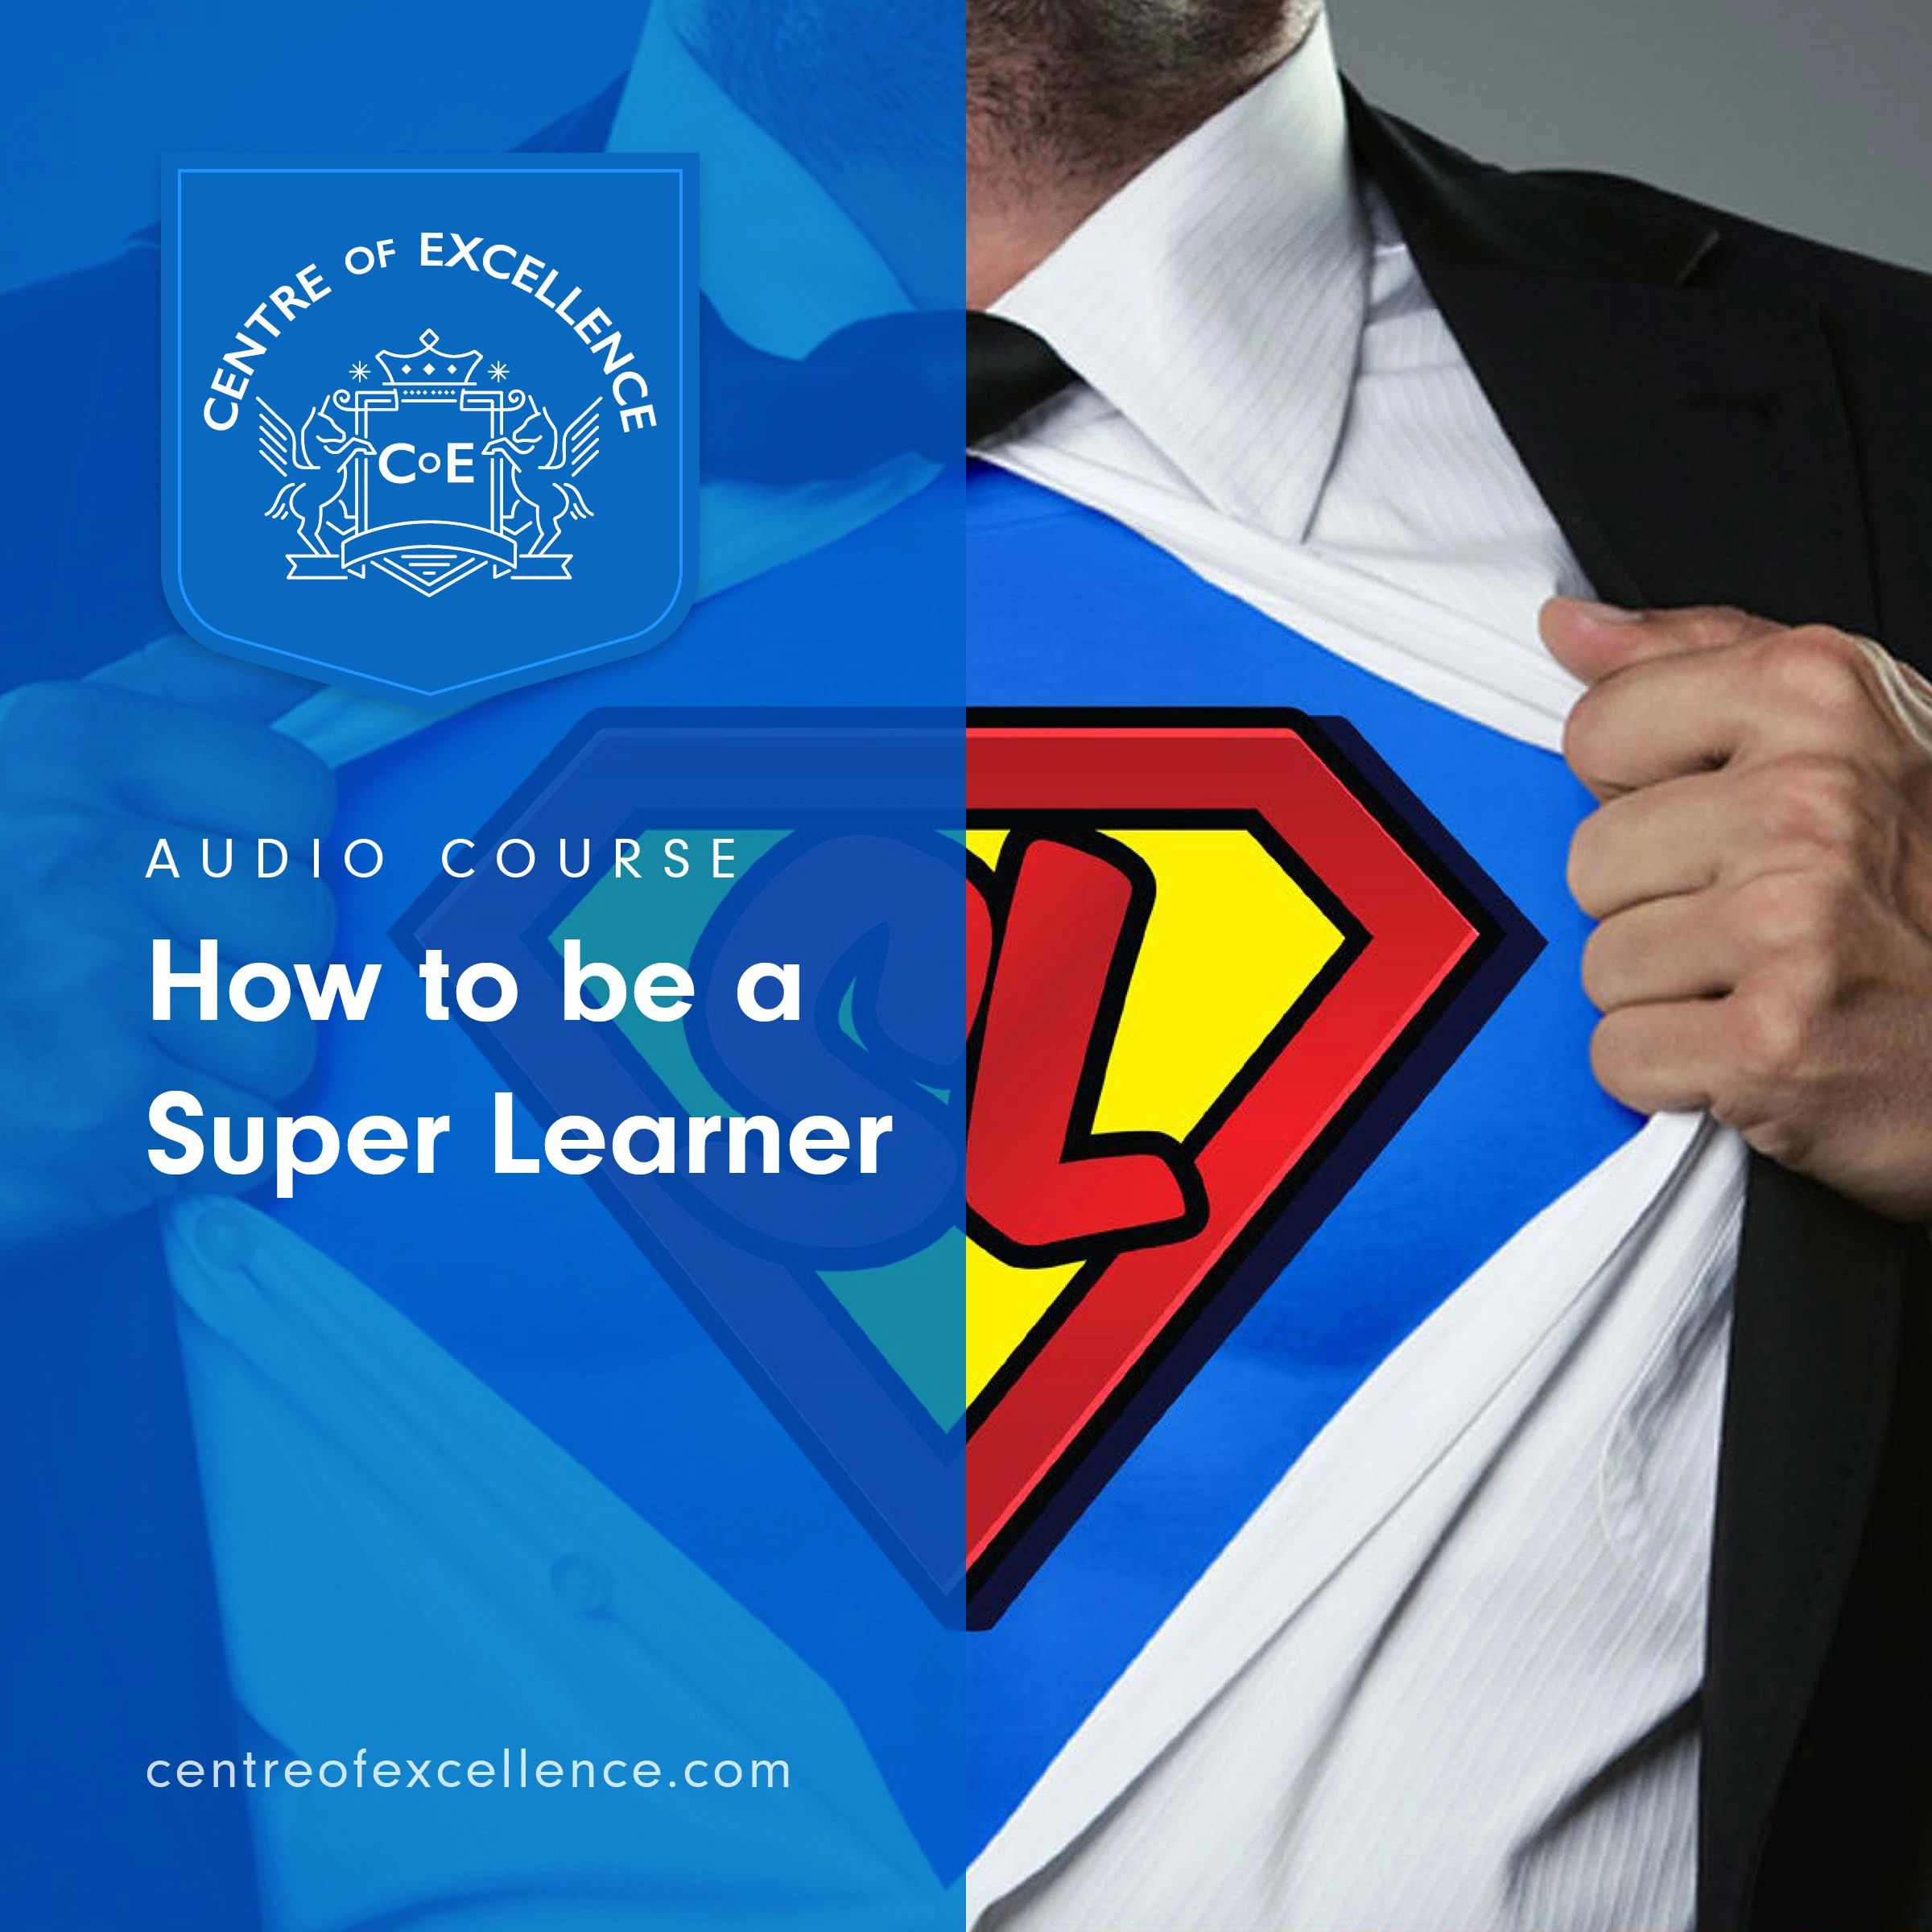 How to be a Super Learner Audiobook by Centre of Excellence